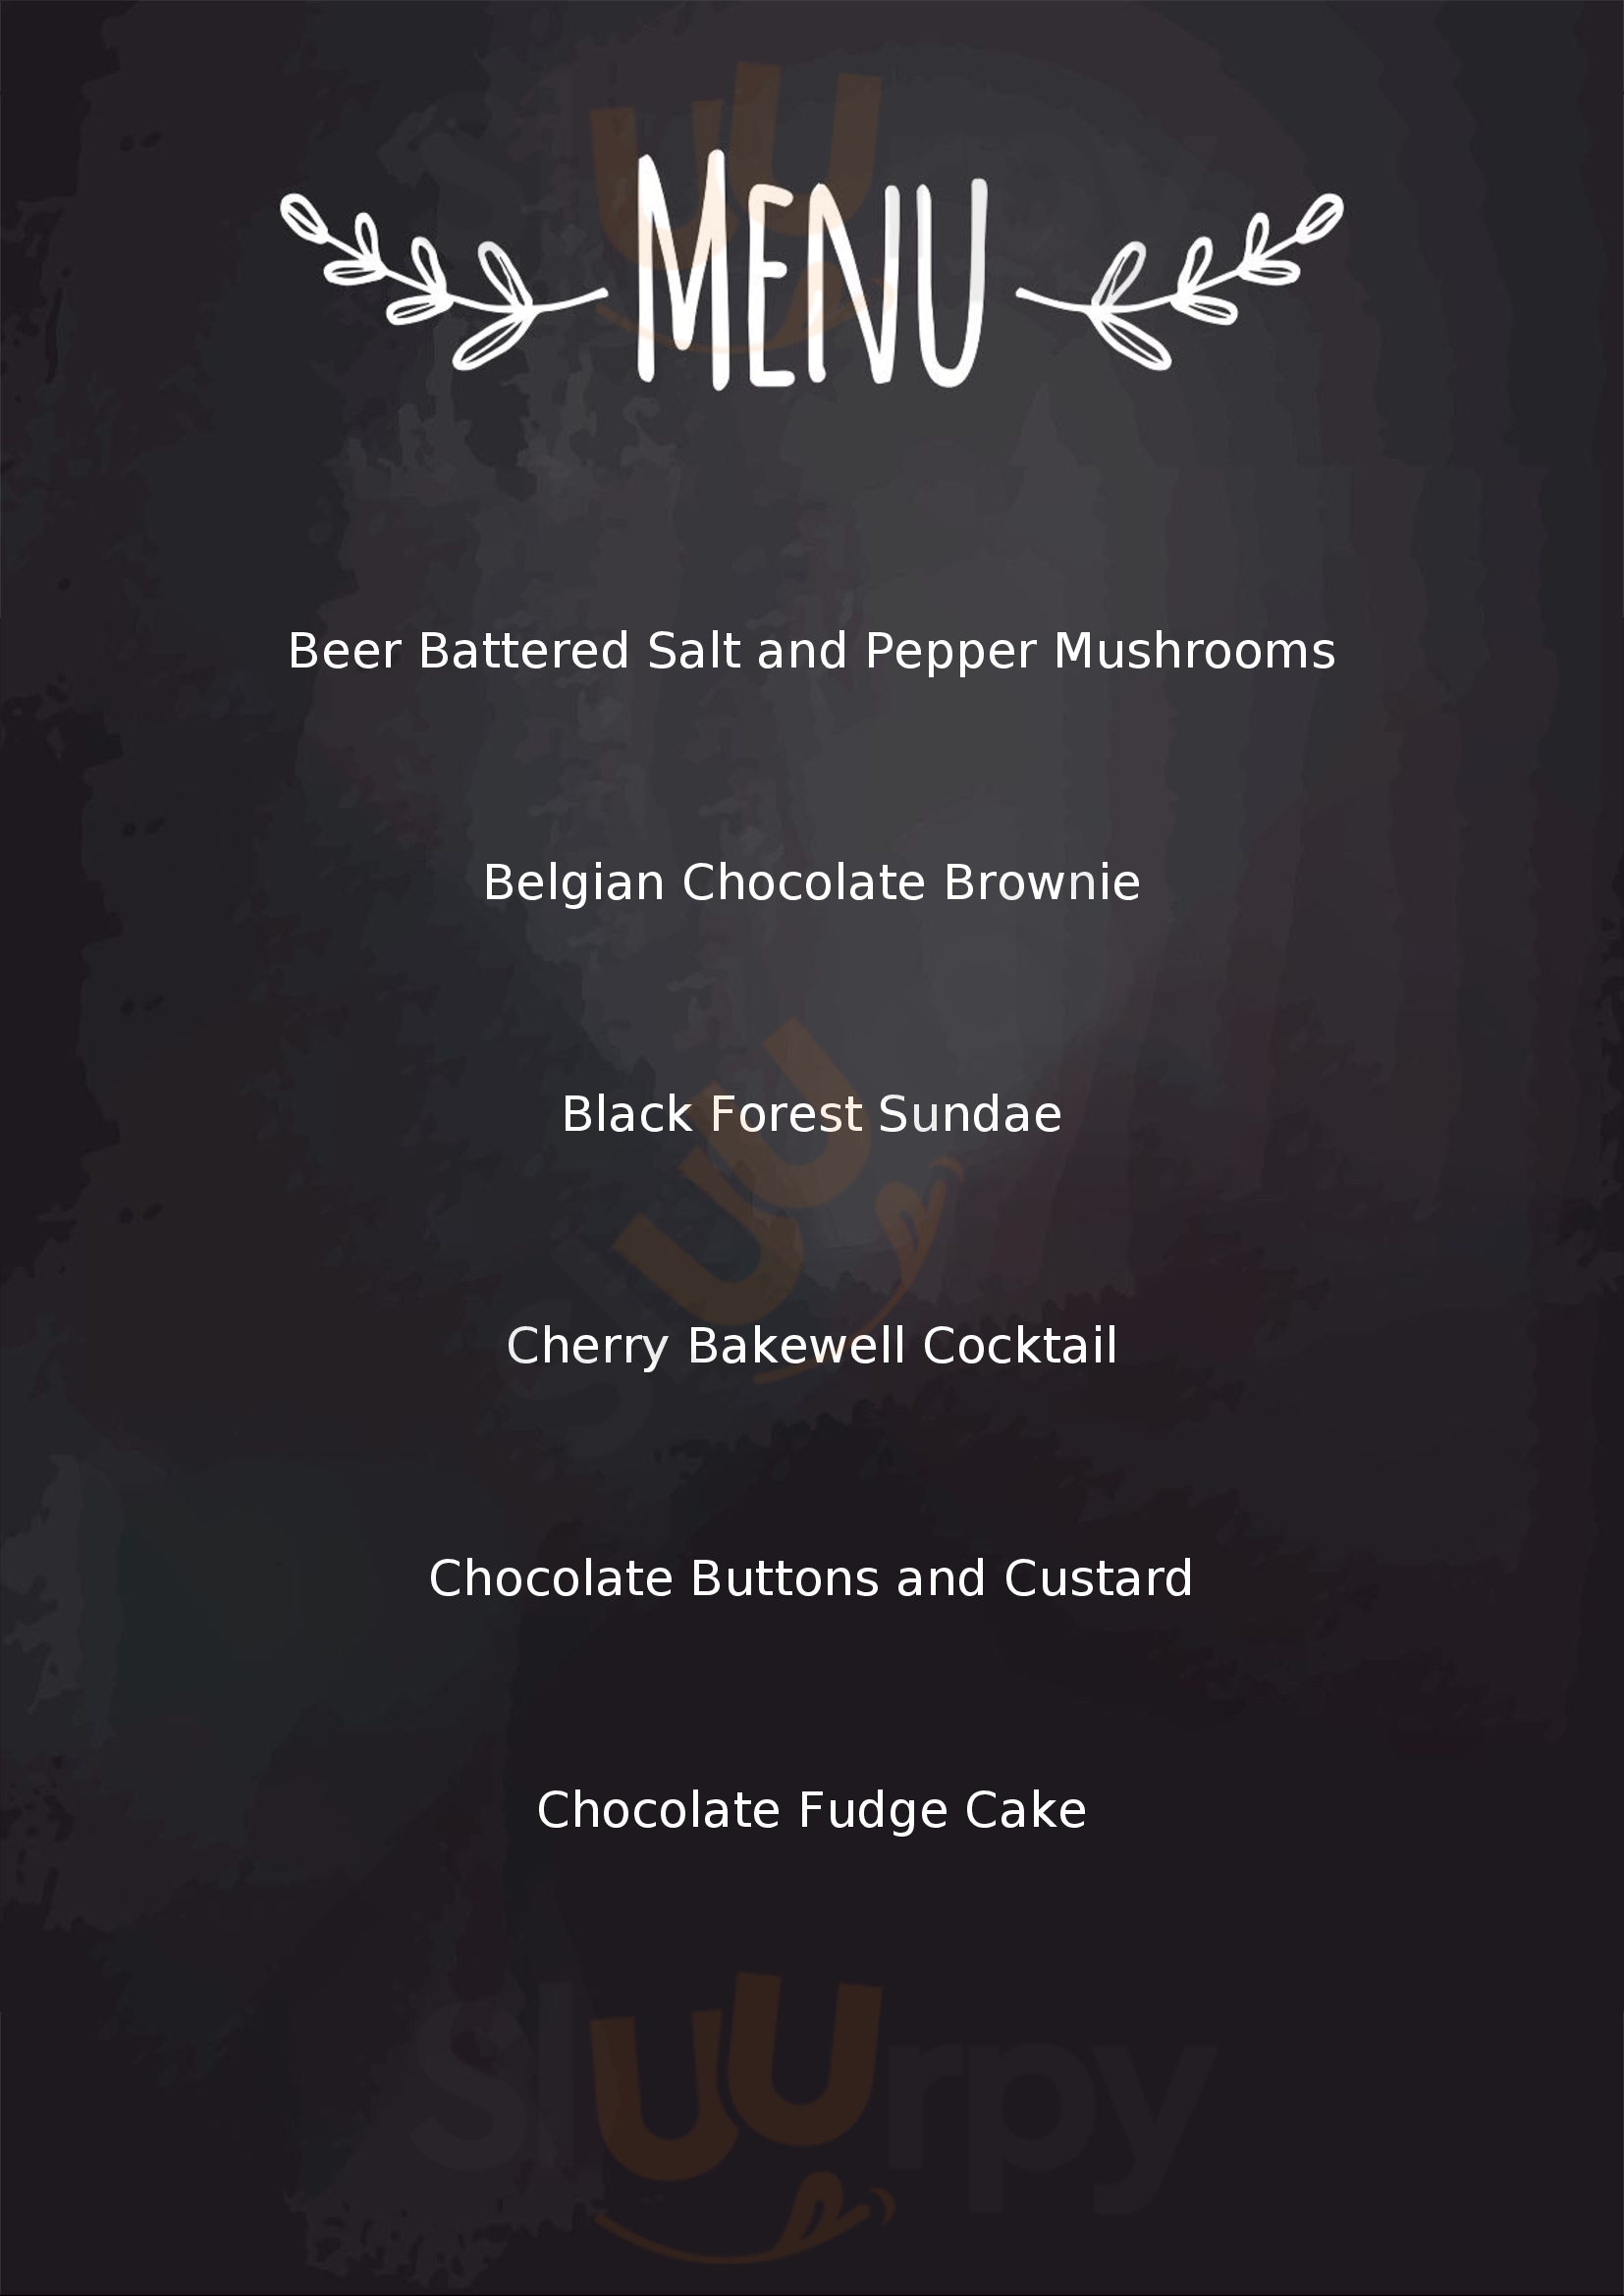 The Four In Hand Kingston-upon-Hull Menu - 1